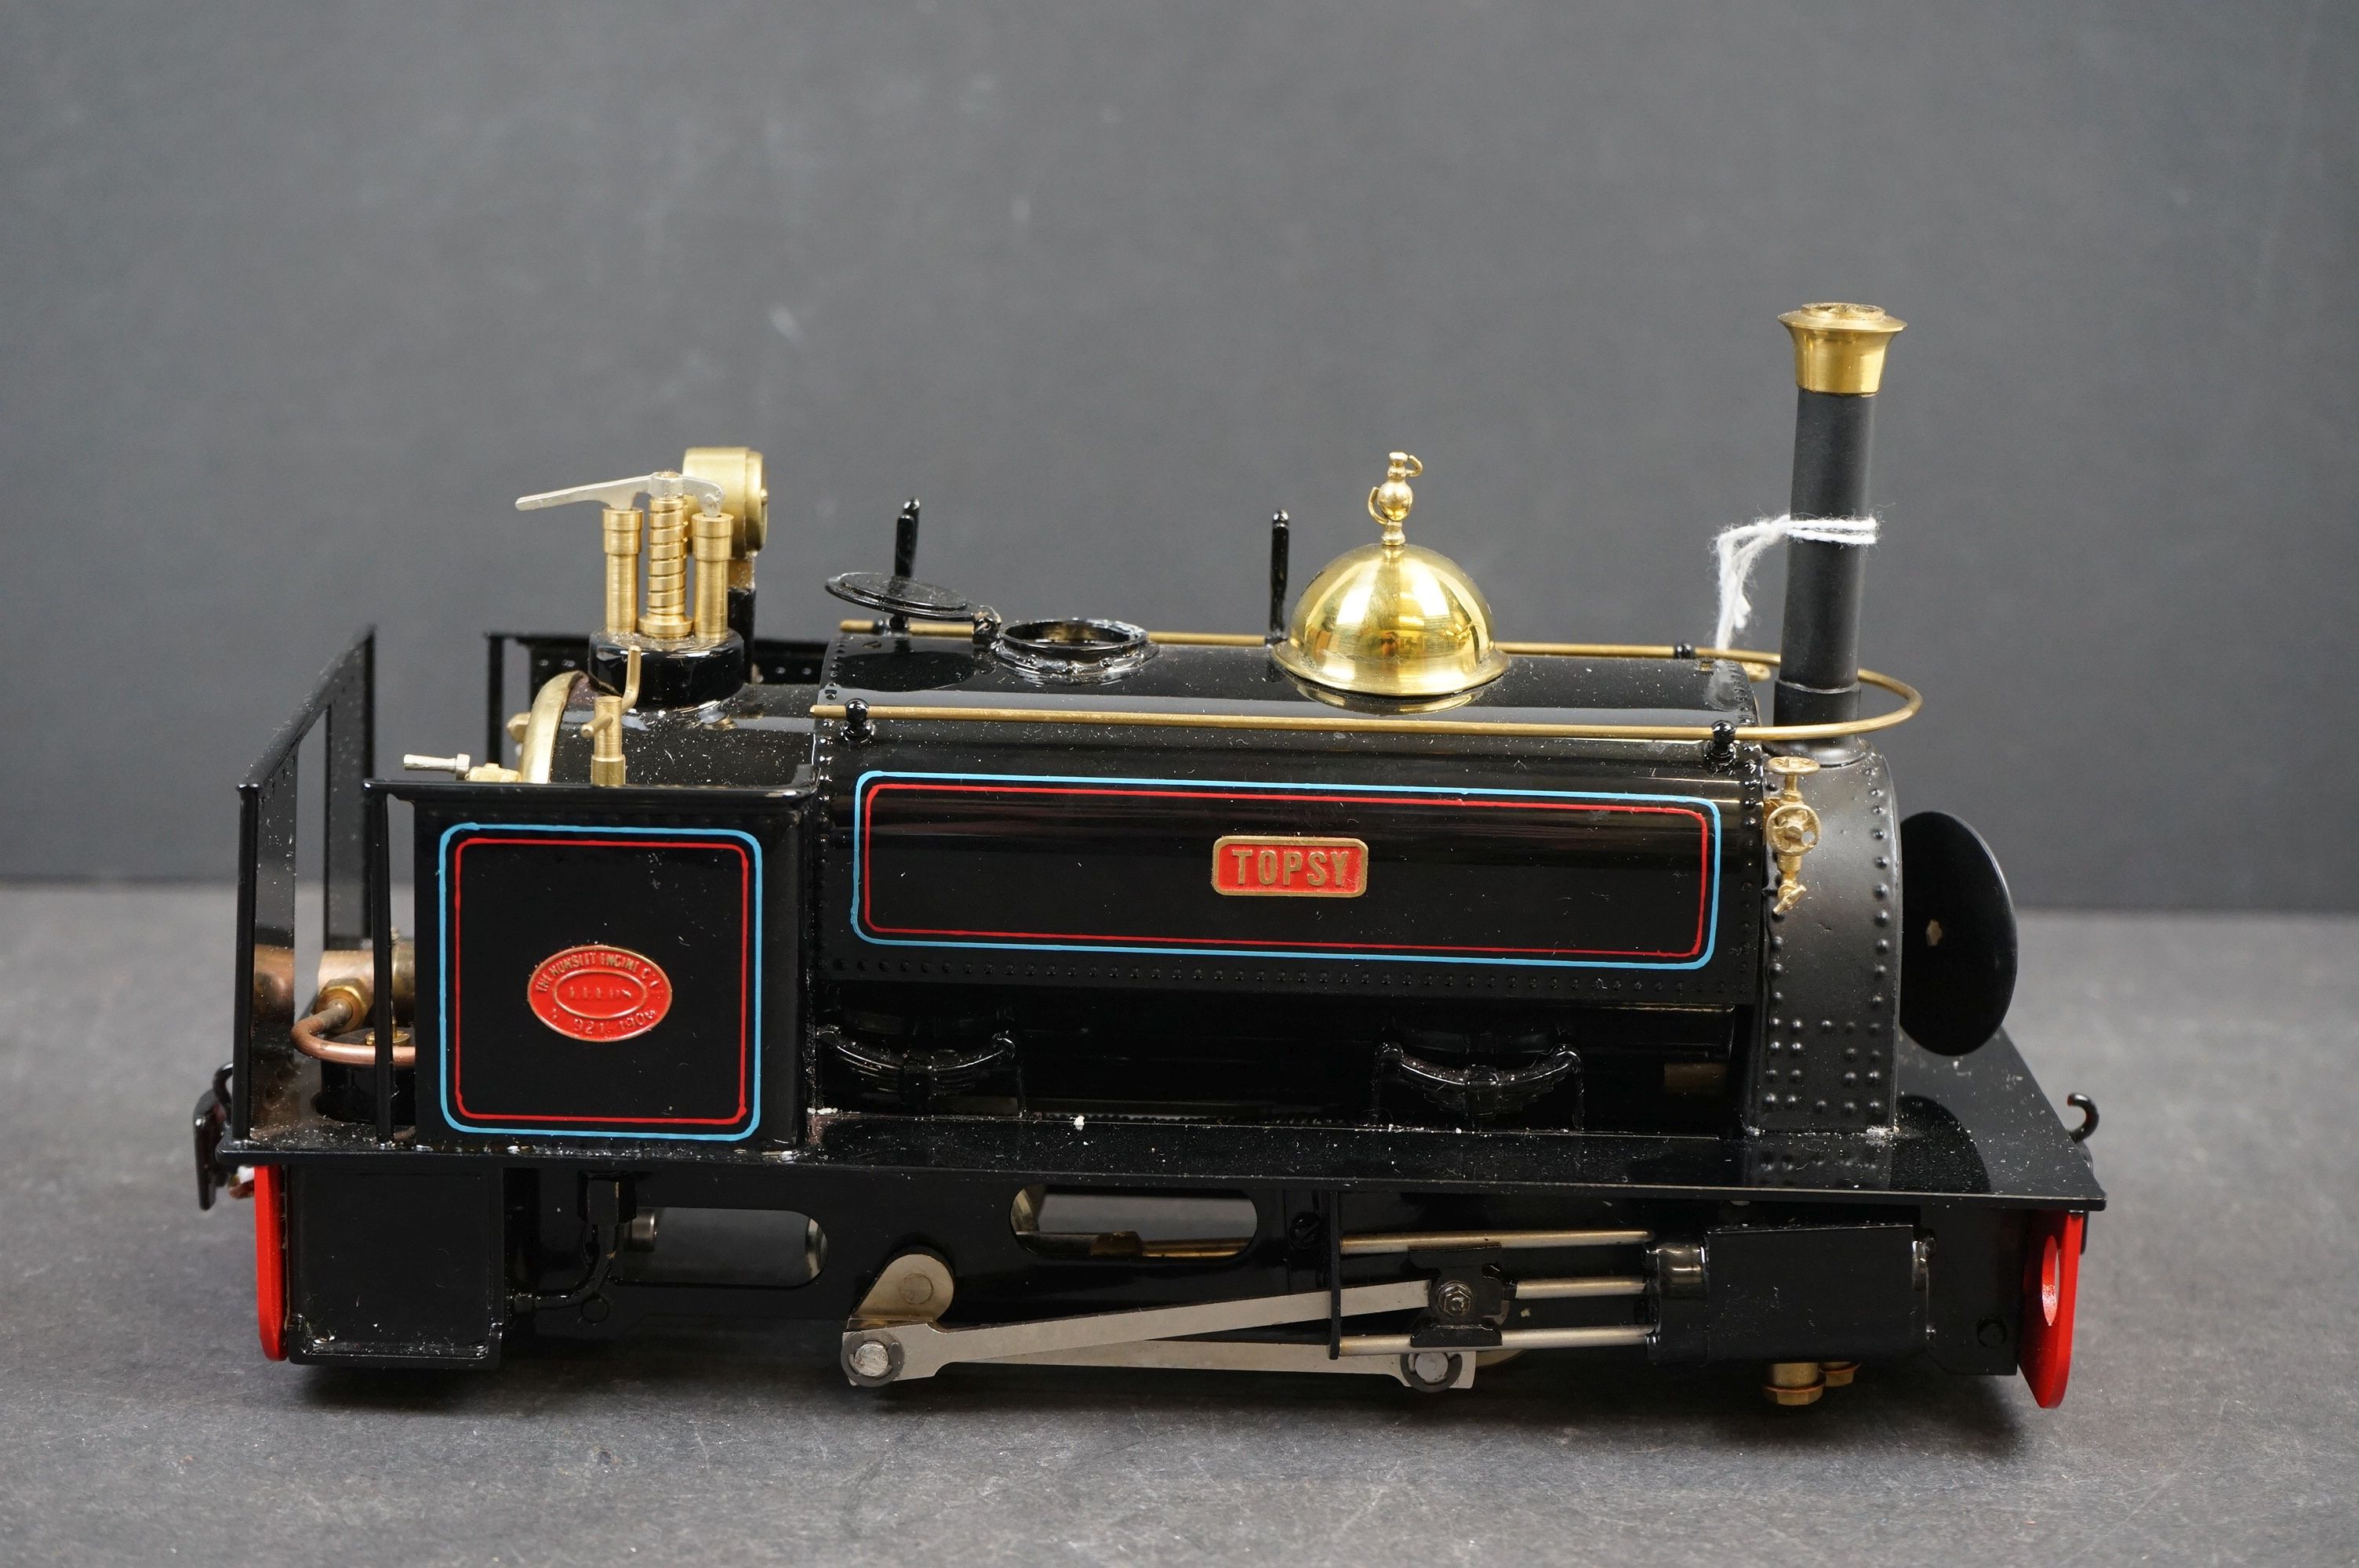 Finescale Engineering Co O Gauge Live Steam 0-4-0 Saddle Tank Locomotive 'Topsy' in black livery,